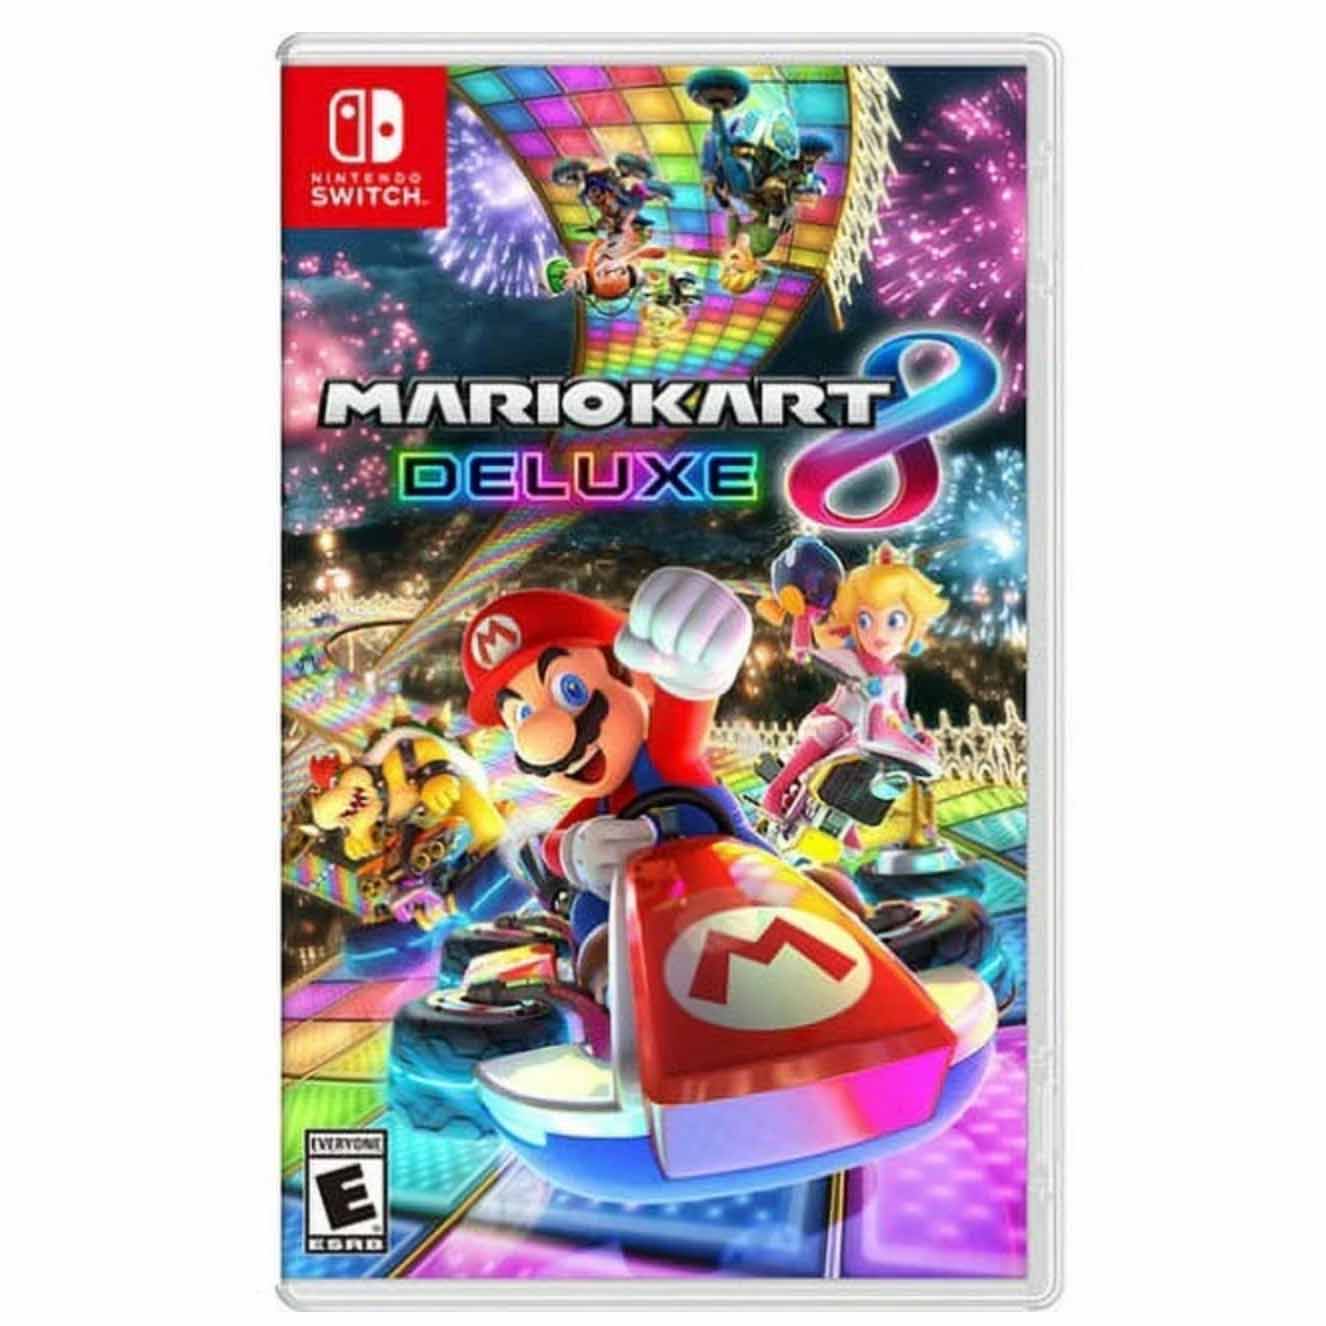 Mario Kart 8 Deluxe game cover